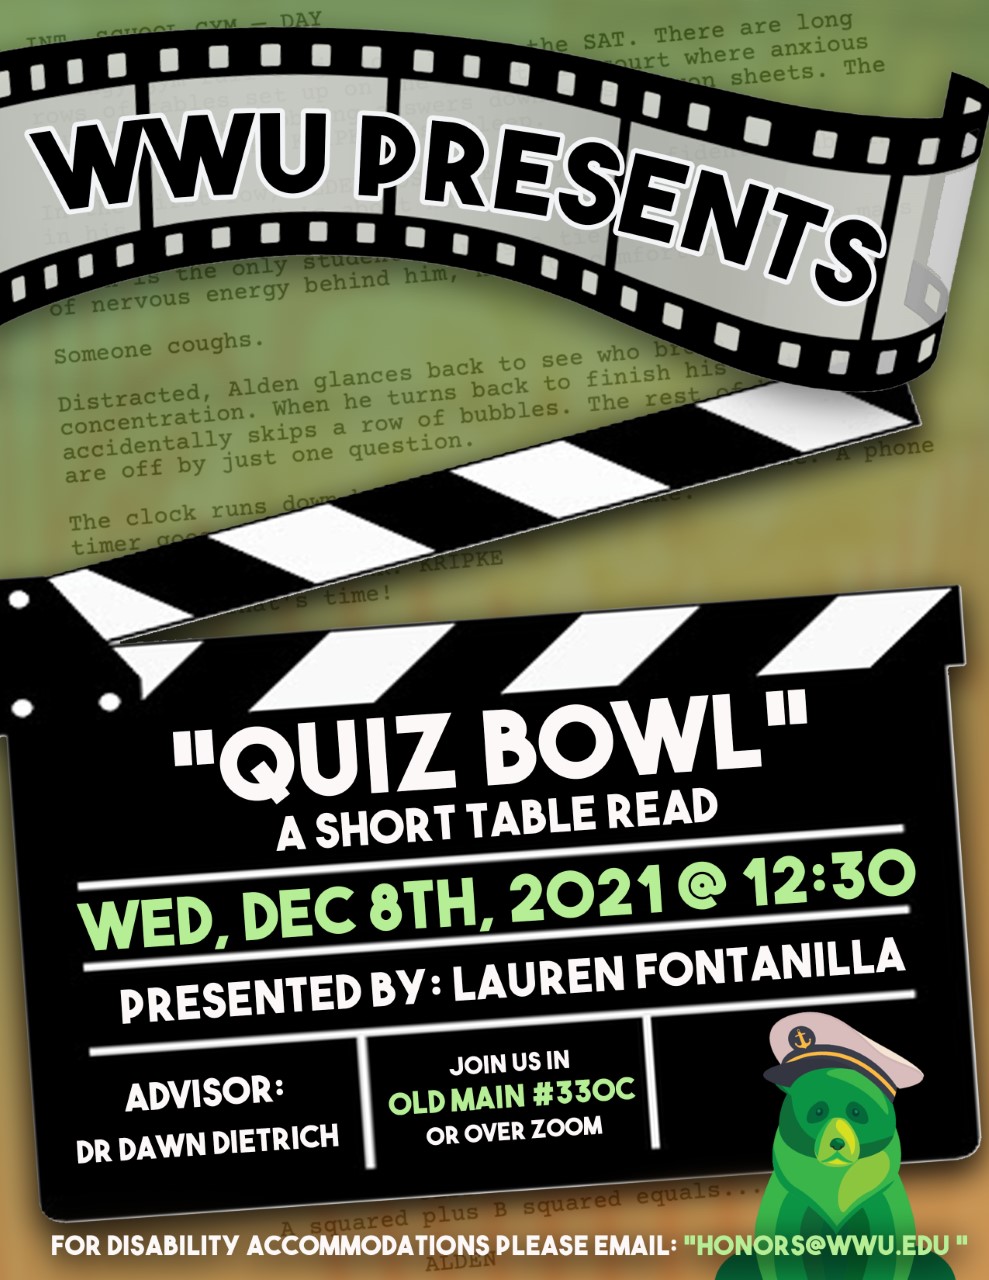 A poster with movie imagery. The text reads: "WWU Presents: "Quiz Bowl" A Short Table Read. Wednesday, December 8th, 2021 at 12:30. Presented by: Lauren Fontanilla. Advisor: Dr. Dawn Dietrich. Join us in Old Main #330C or over zoom. For disability accommodations please email honors@wwu.edu" 